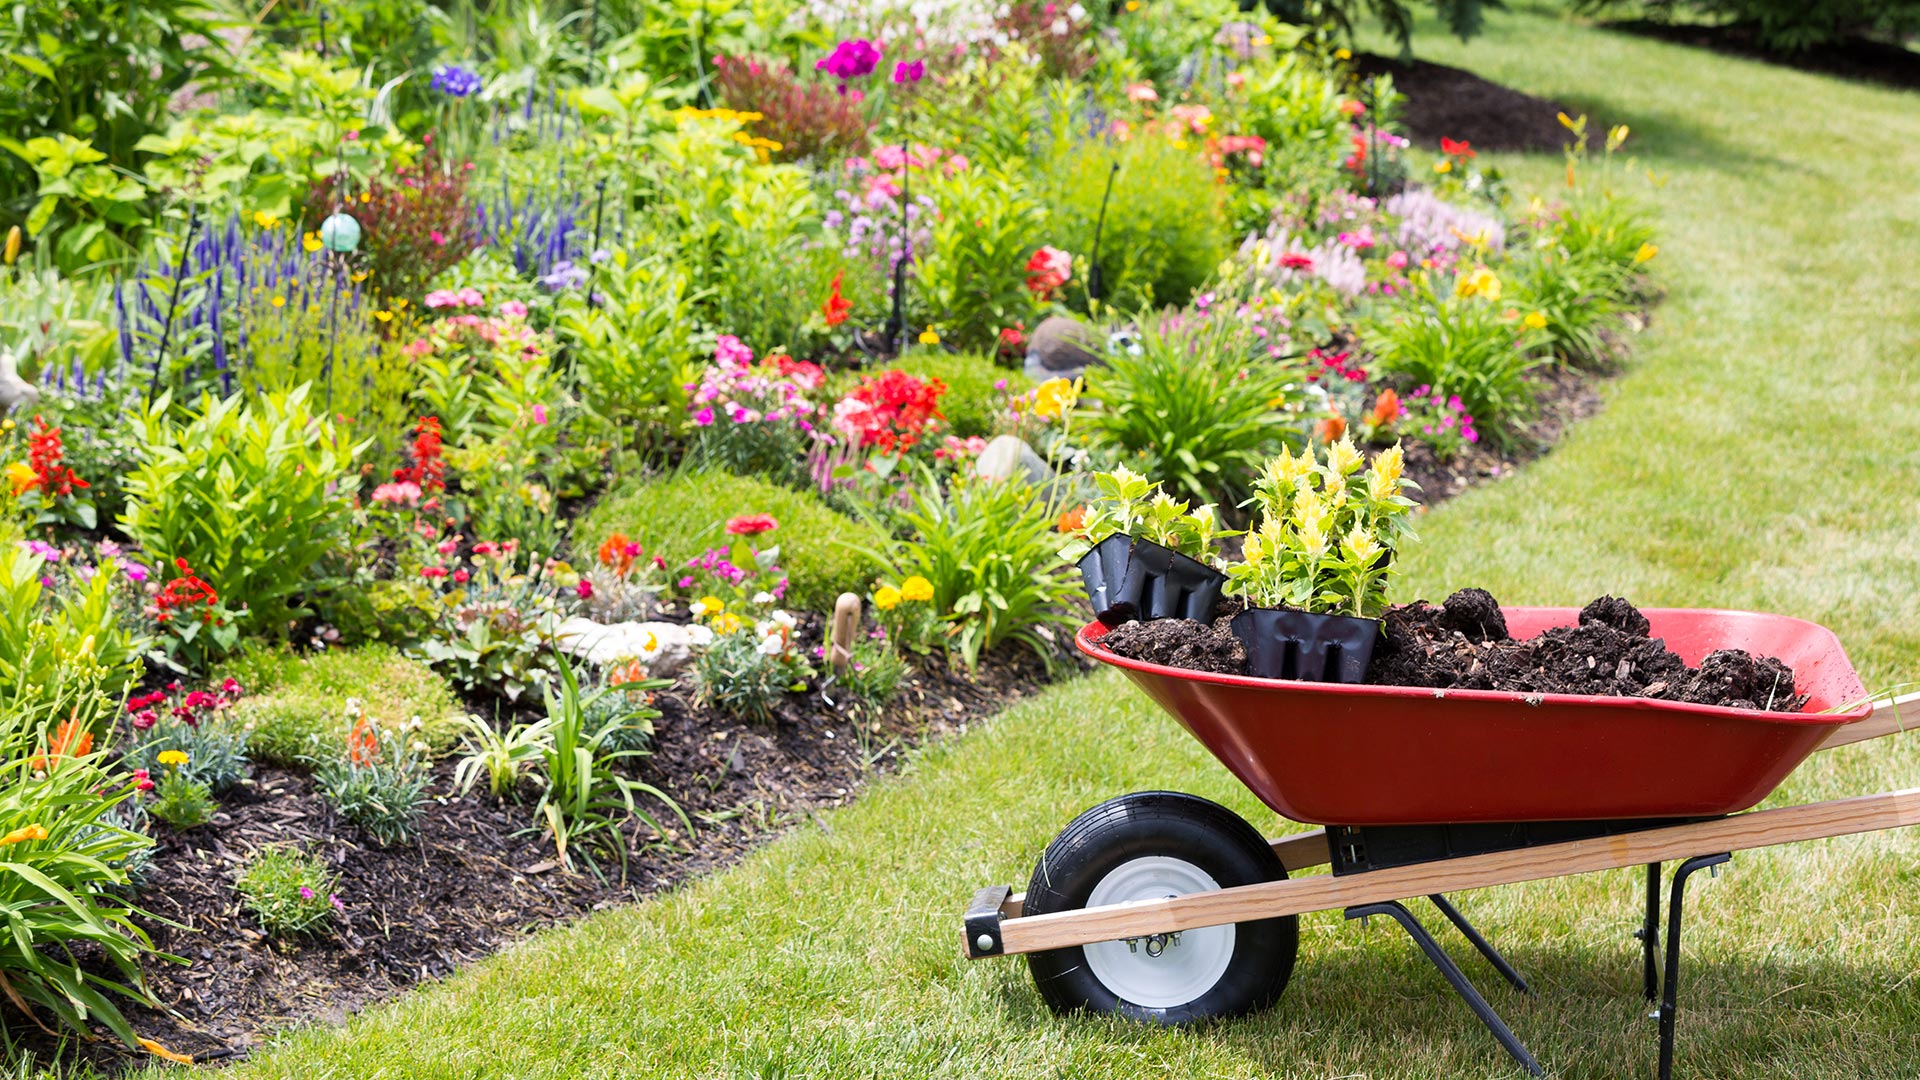 Always Consult a Professional Company Before Installing a New Landscape Bed